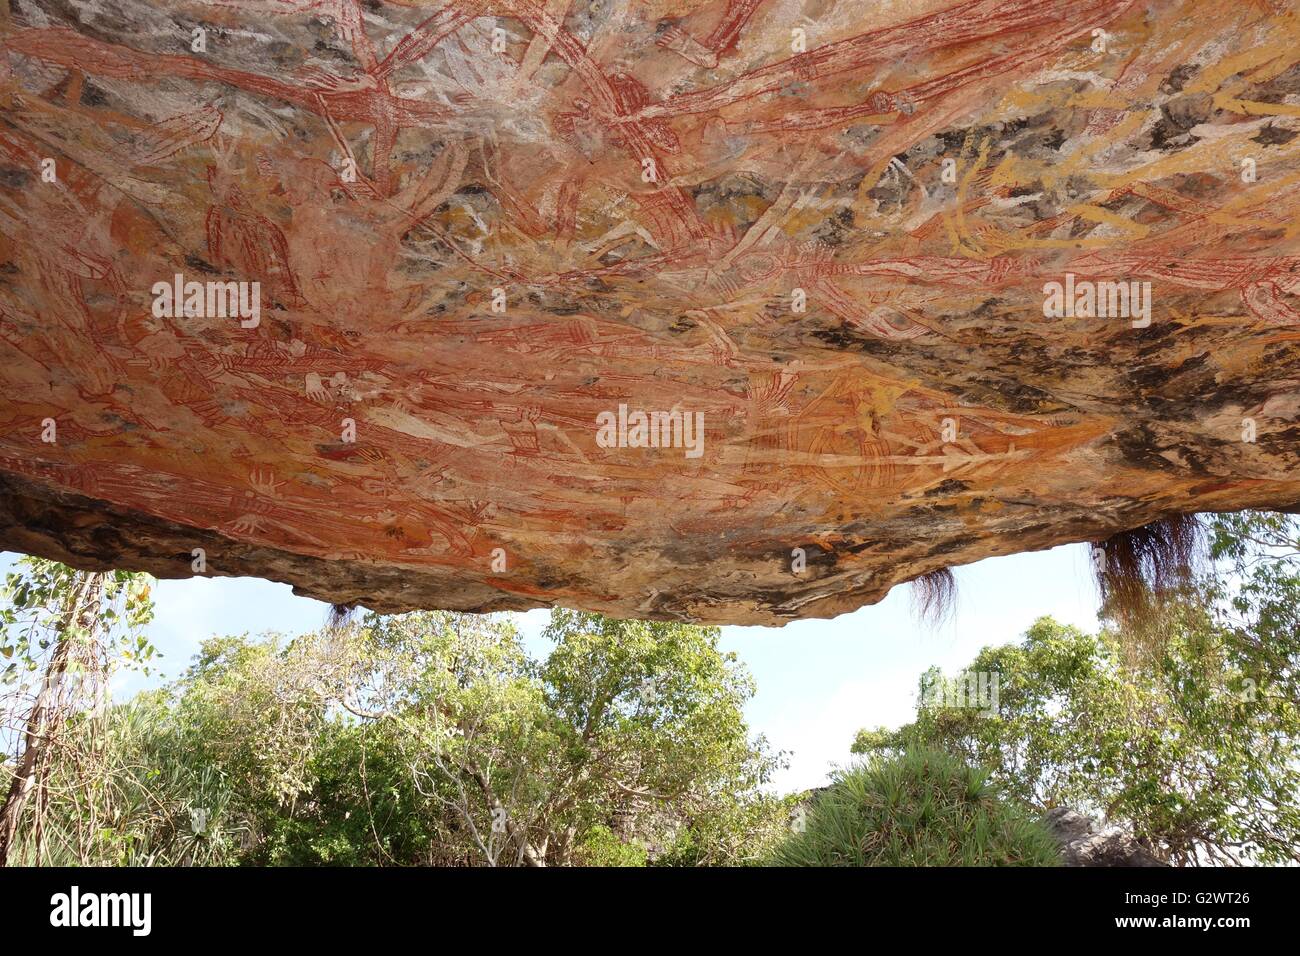 Ancient Aboriginal cave paintings known as 'rock art' found at Mount Borradaile, West Arnhem Land, Northern Territory, Australia Stock Photo